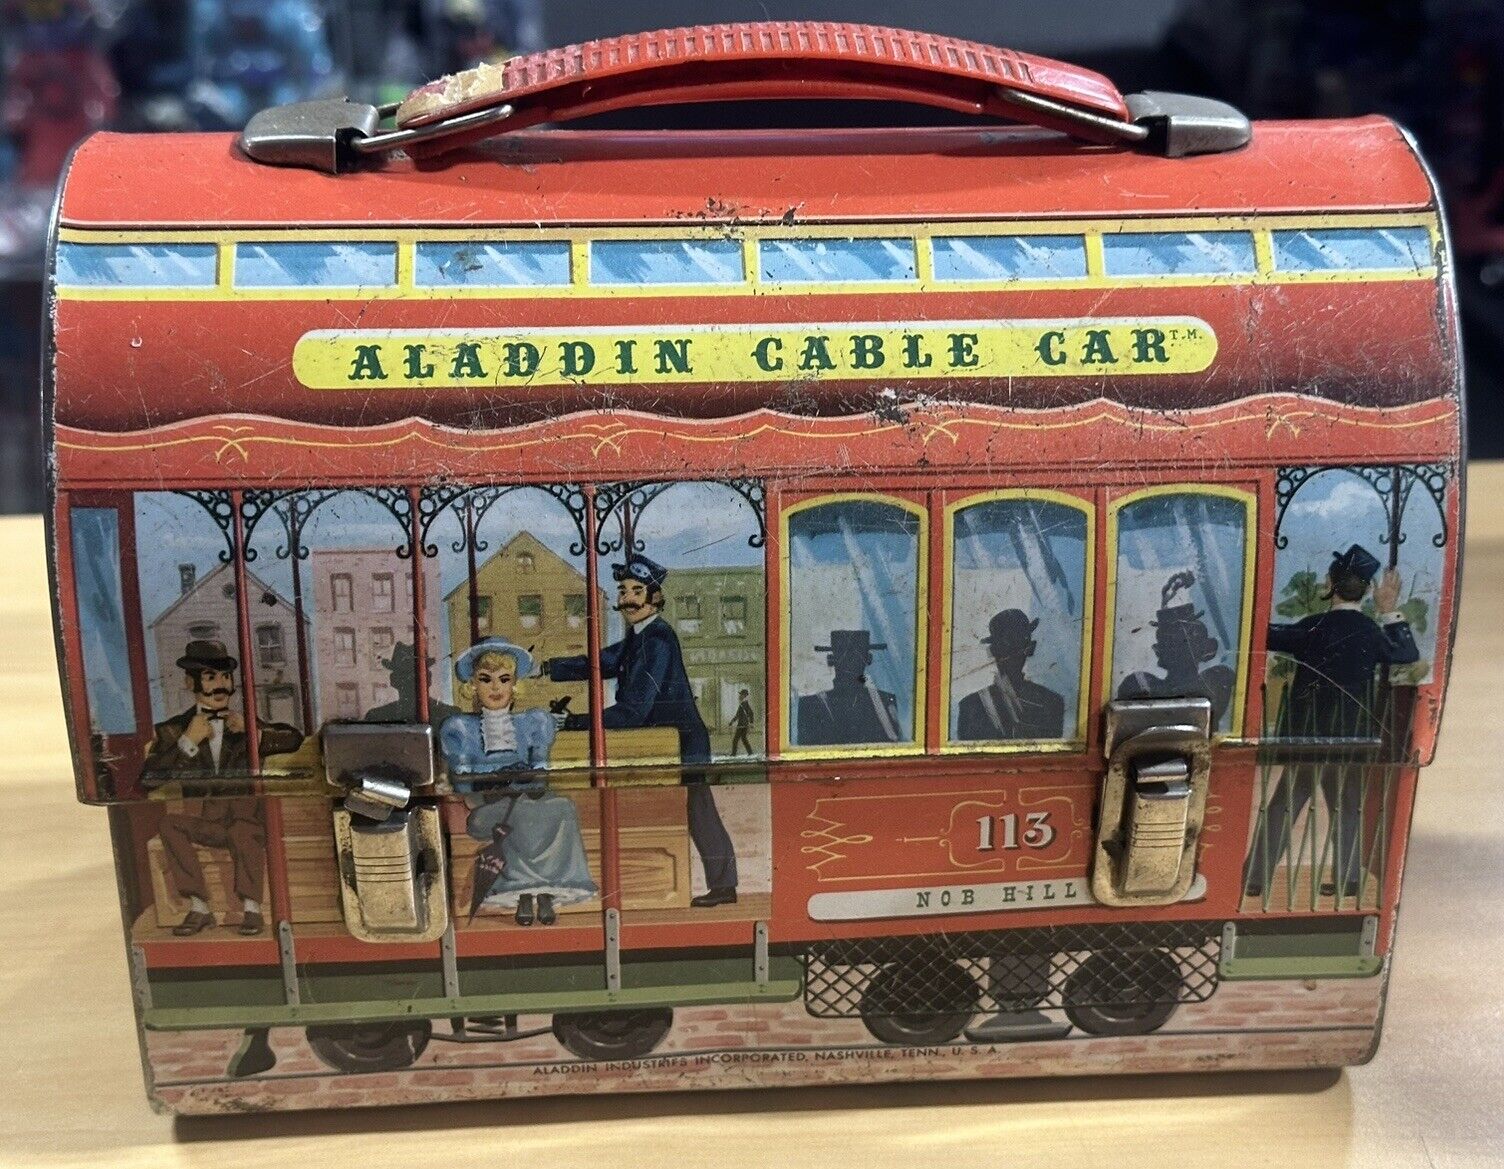 1962 Aladdin Industries Incorporated “Aladdin Cable Car” Metal Dome Top Lunchbox